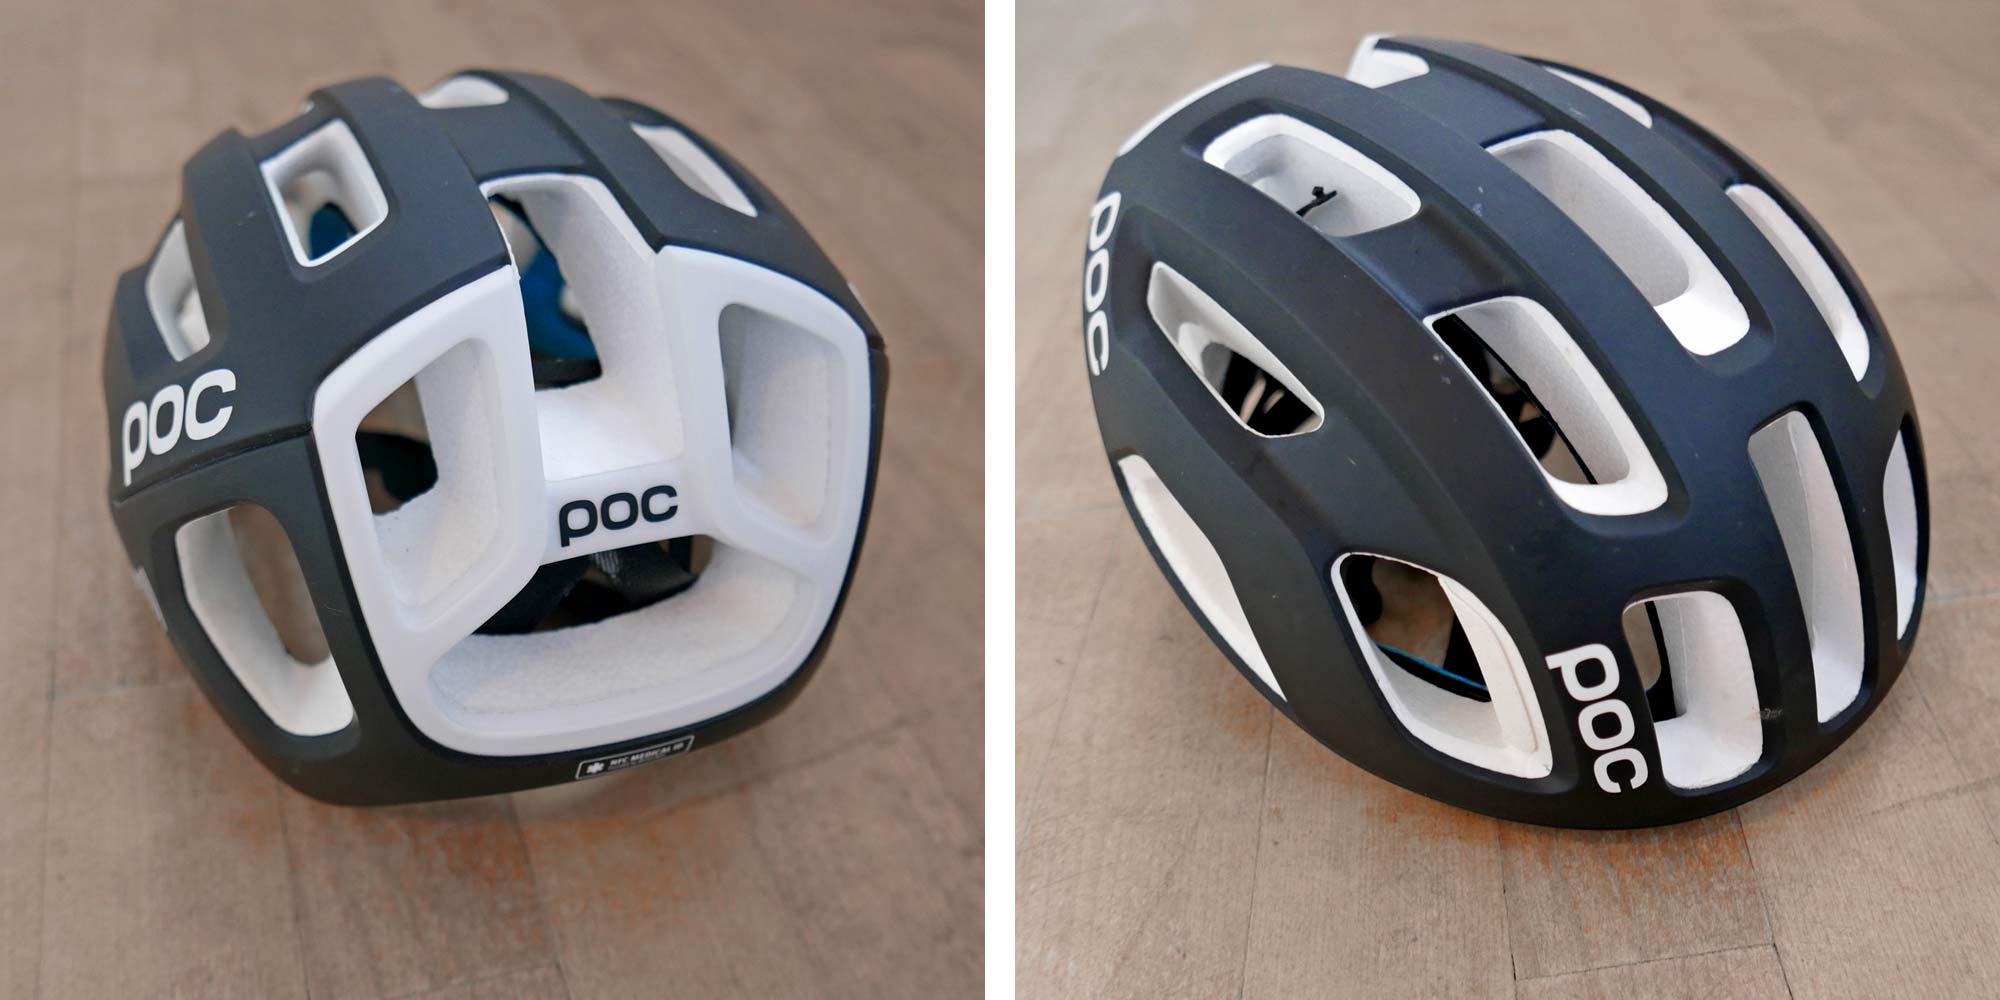 POC Ventral Air Spin Bike Helmet for Road Cycling 